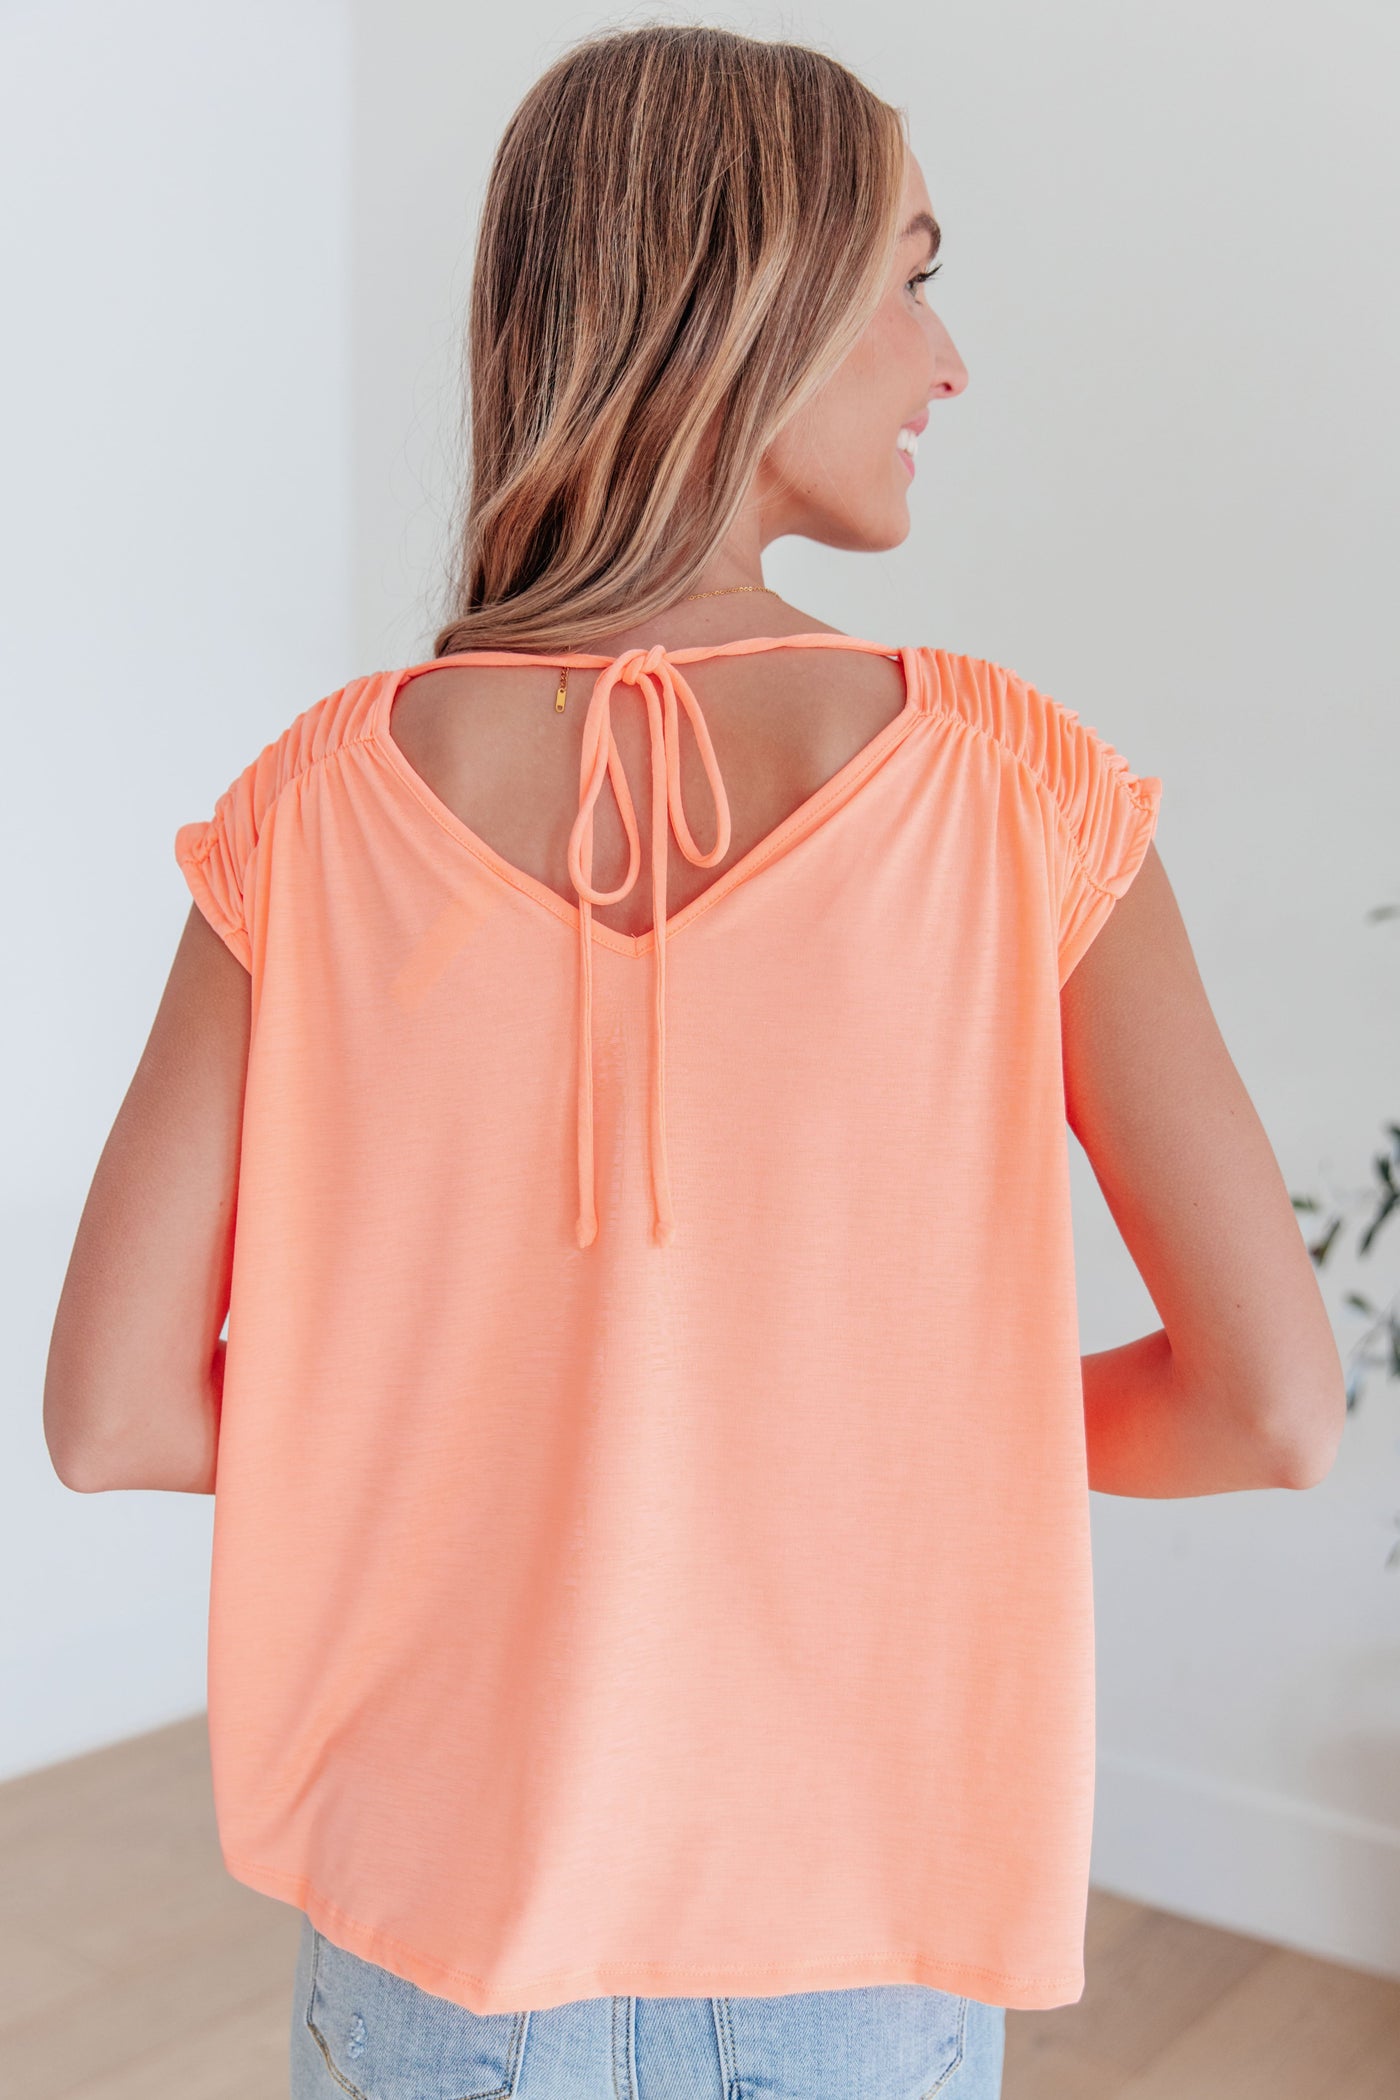 Ruched Cap Sleeve Top in Neon Orange Southern Soul Collectives